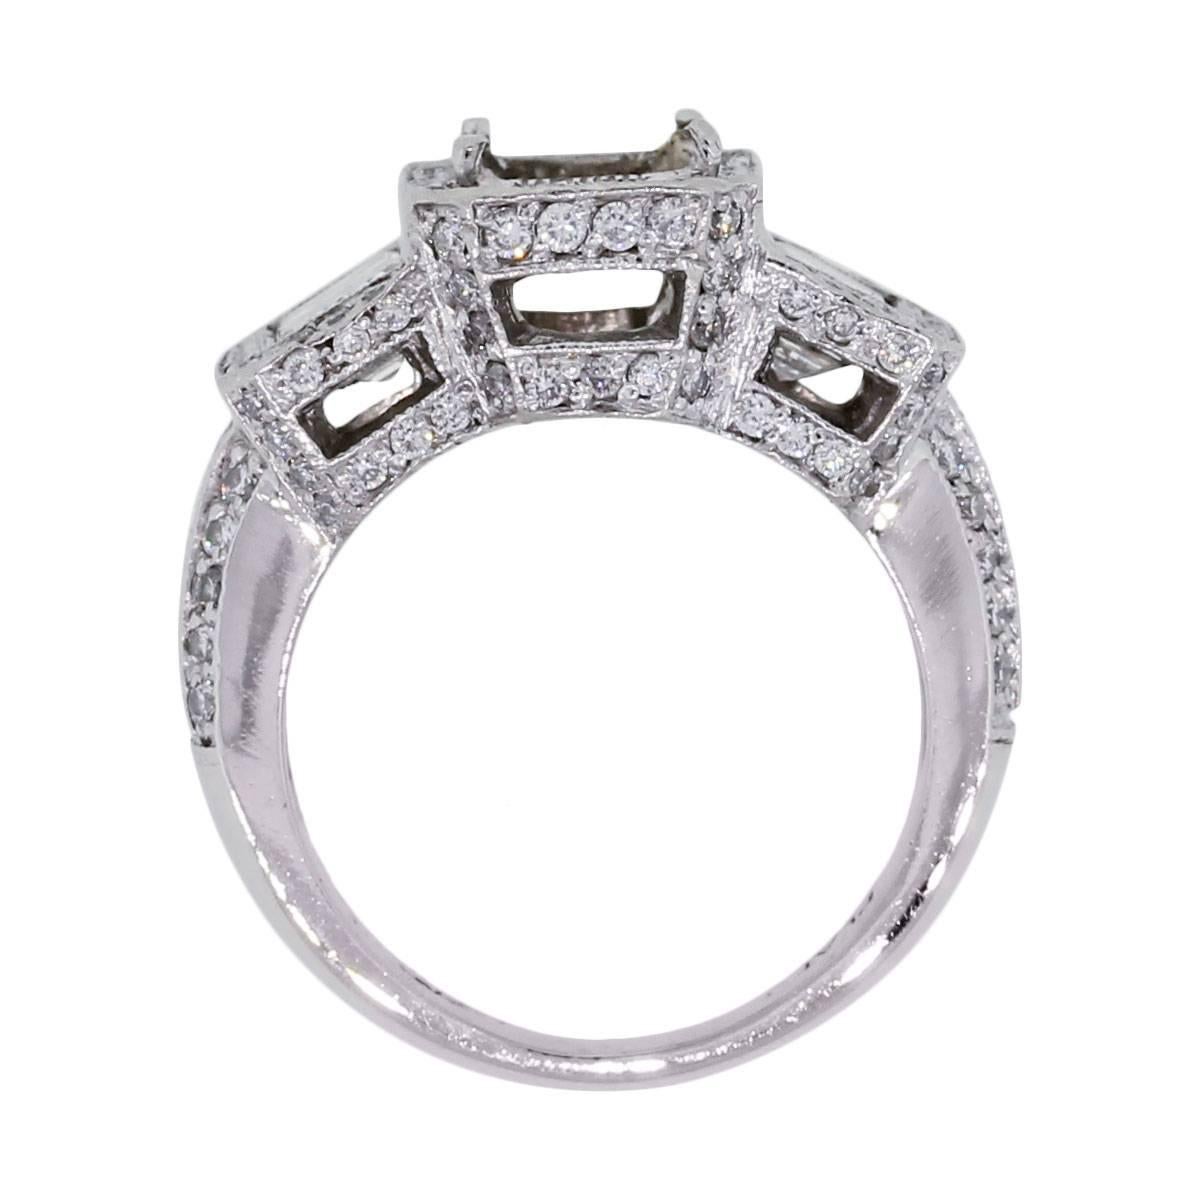 Material: Platinum
Diamond Details: Approximately 2.50ctw emerald cut diamonds and round brilliant diamonds. Diamonds are G/H in color and VS in clarity.
Mounting Details: 4 prong mounting, can accept emerald shape stone up to 7.24mm x 5.35mm
Ring